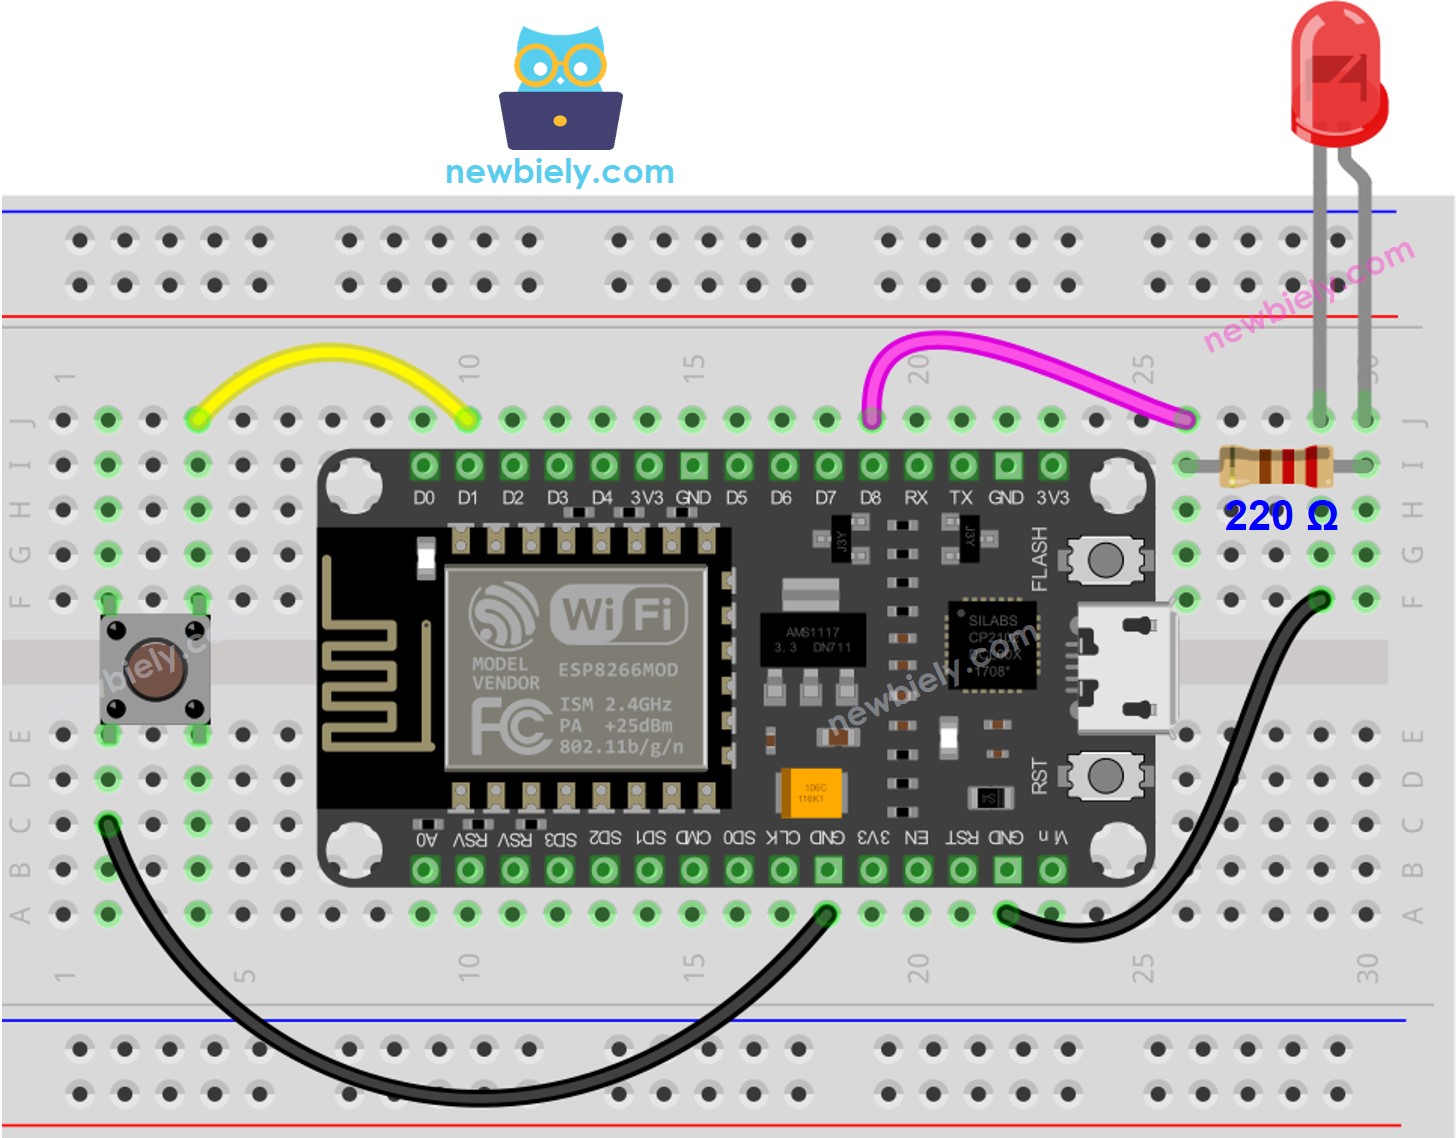 The wiring diagram between ESP8266 NodeMCU and Button LED